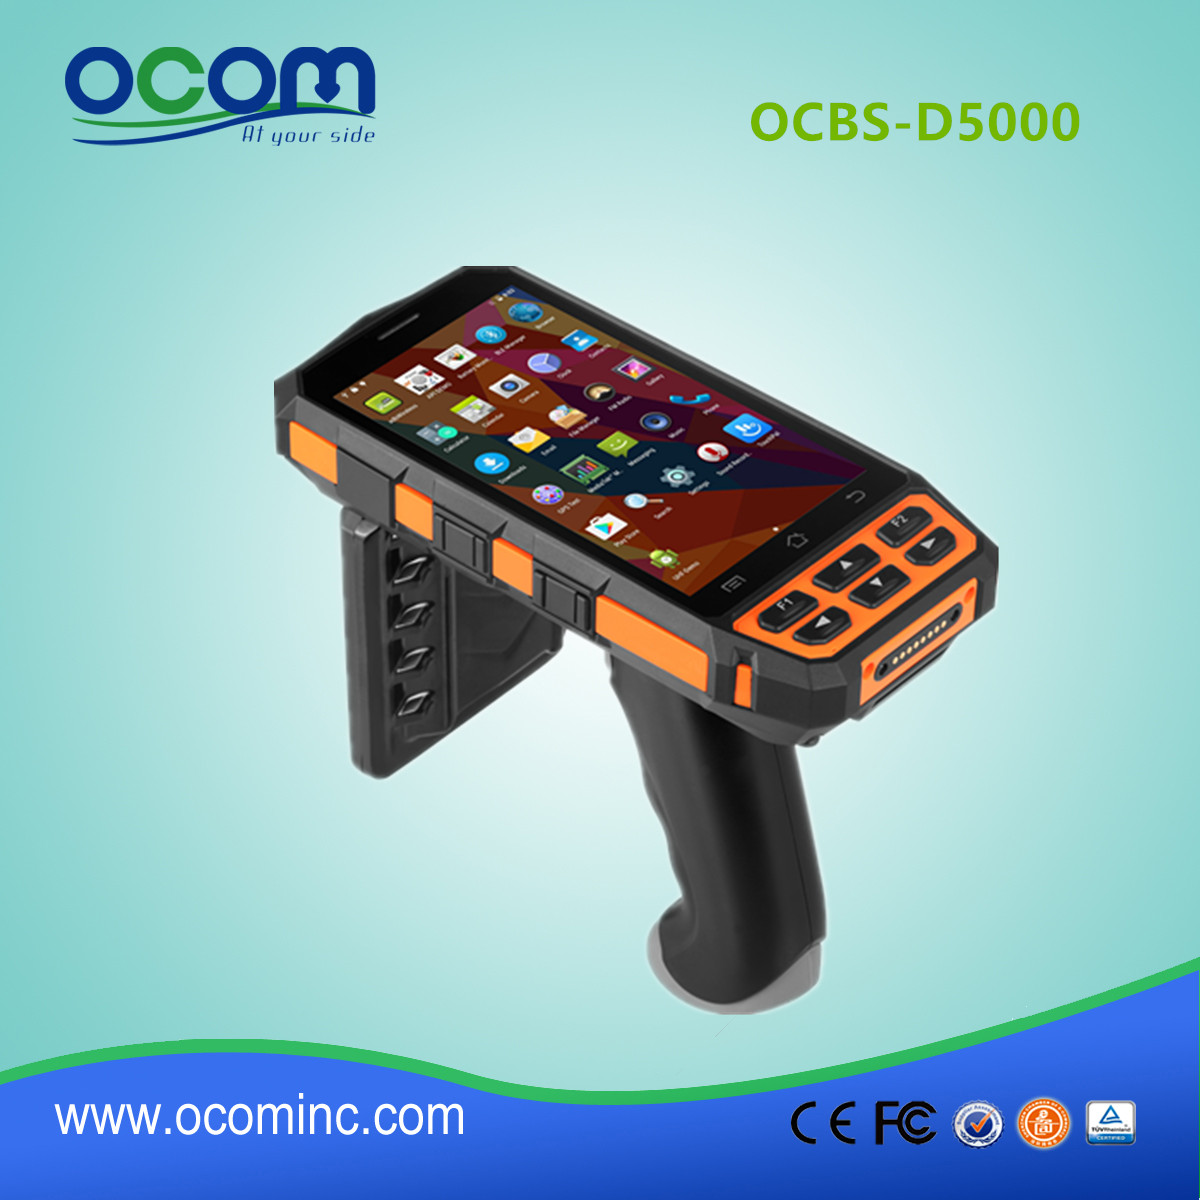 New Model OCBS-D5000 Android Industrial Handheld Terminal